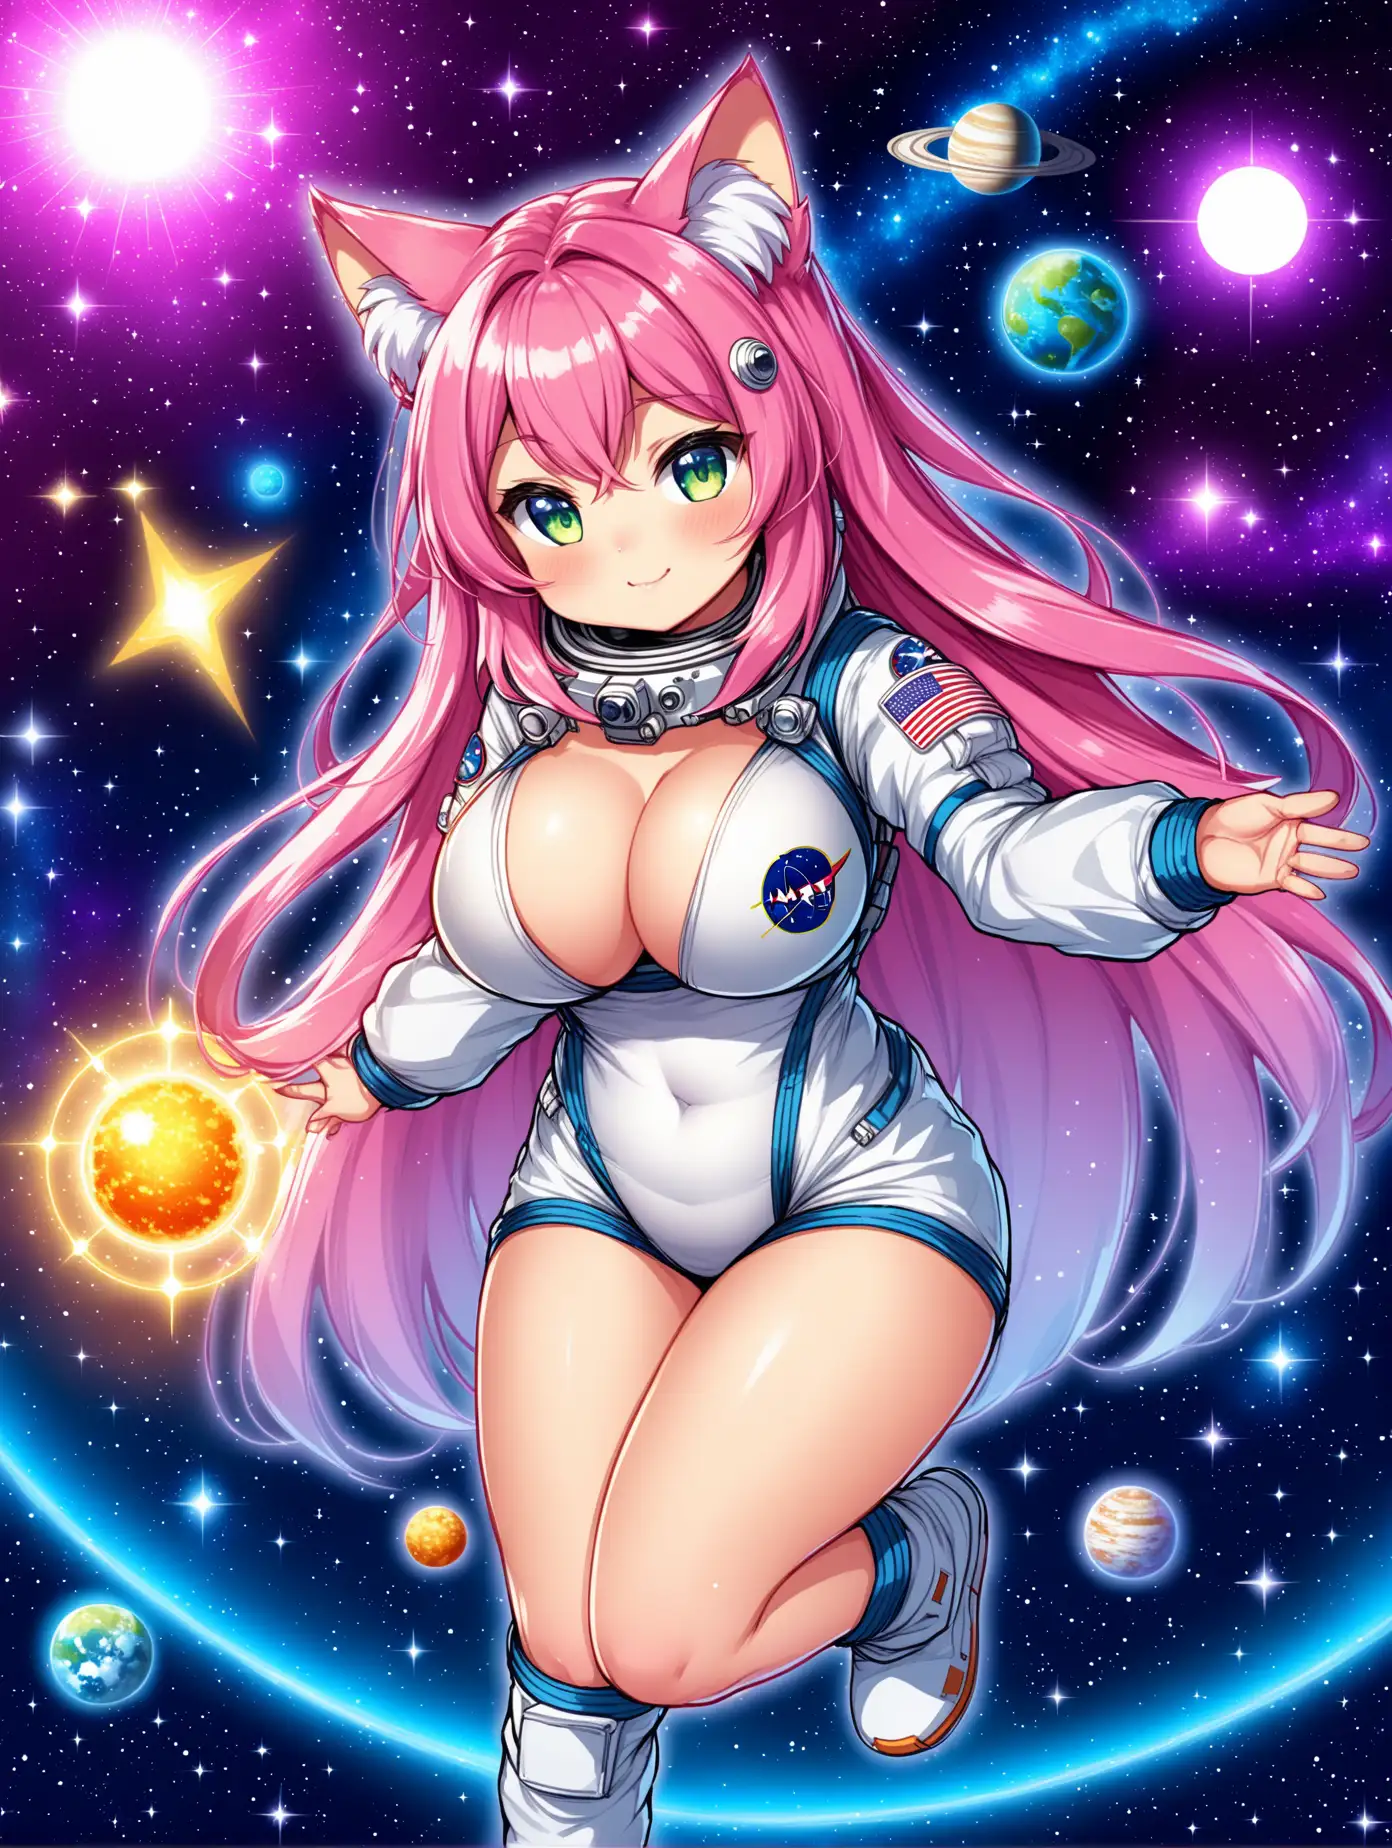 Shortstack Busty catgirl astrology in an astronauts,  cosmic energy all around 